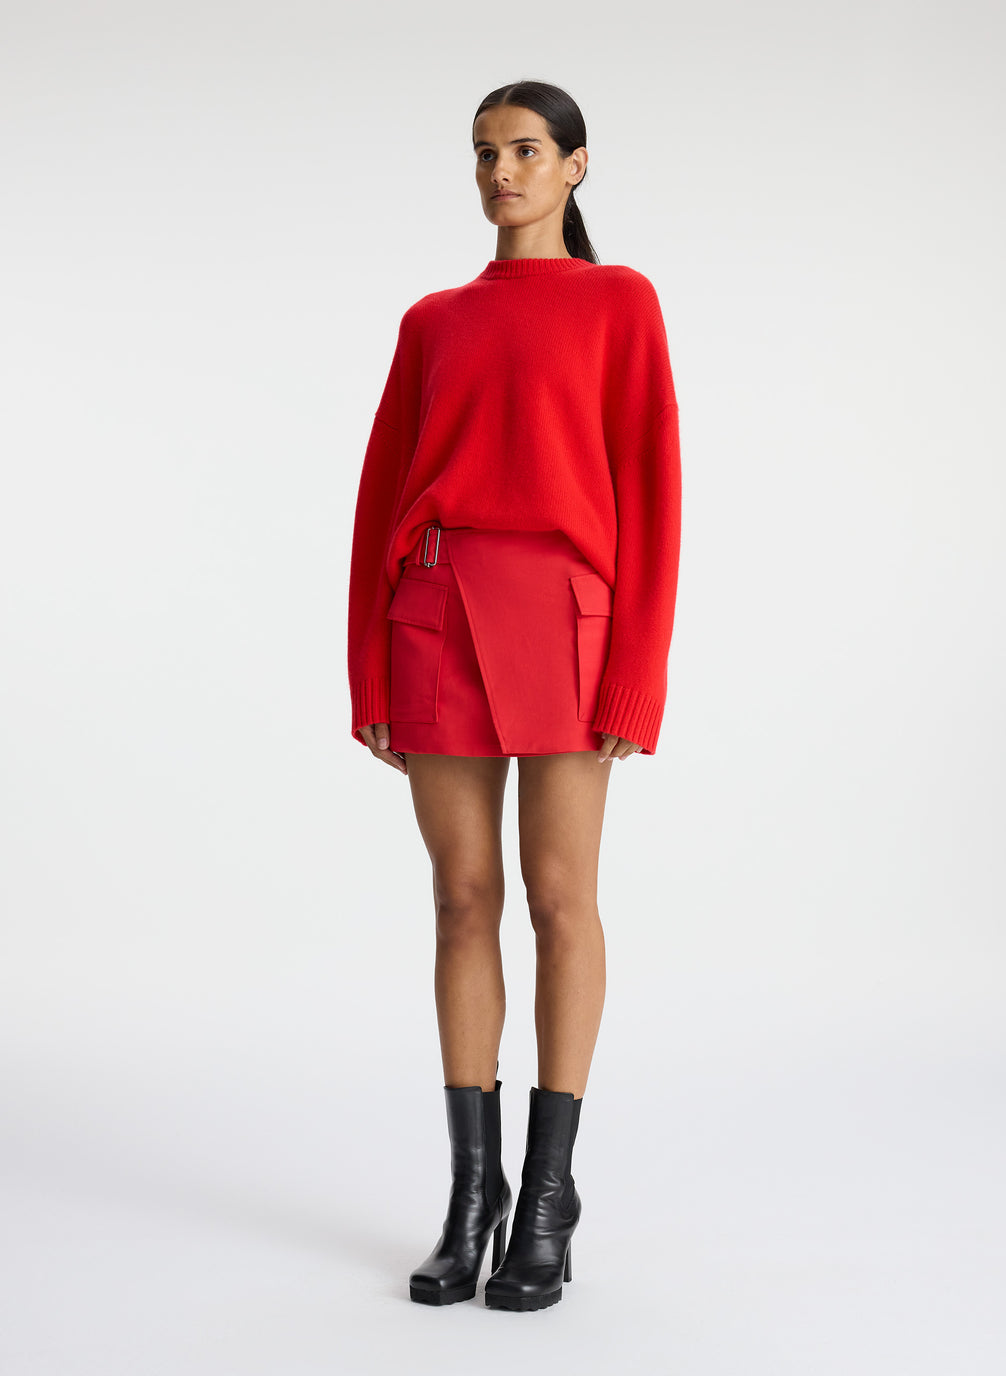 side view of woman wearing red cashmere long sleeve sweater